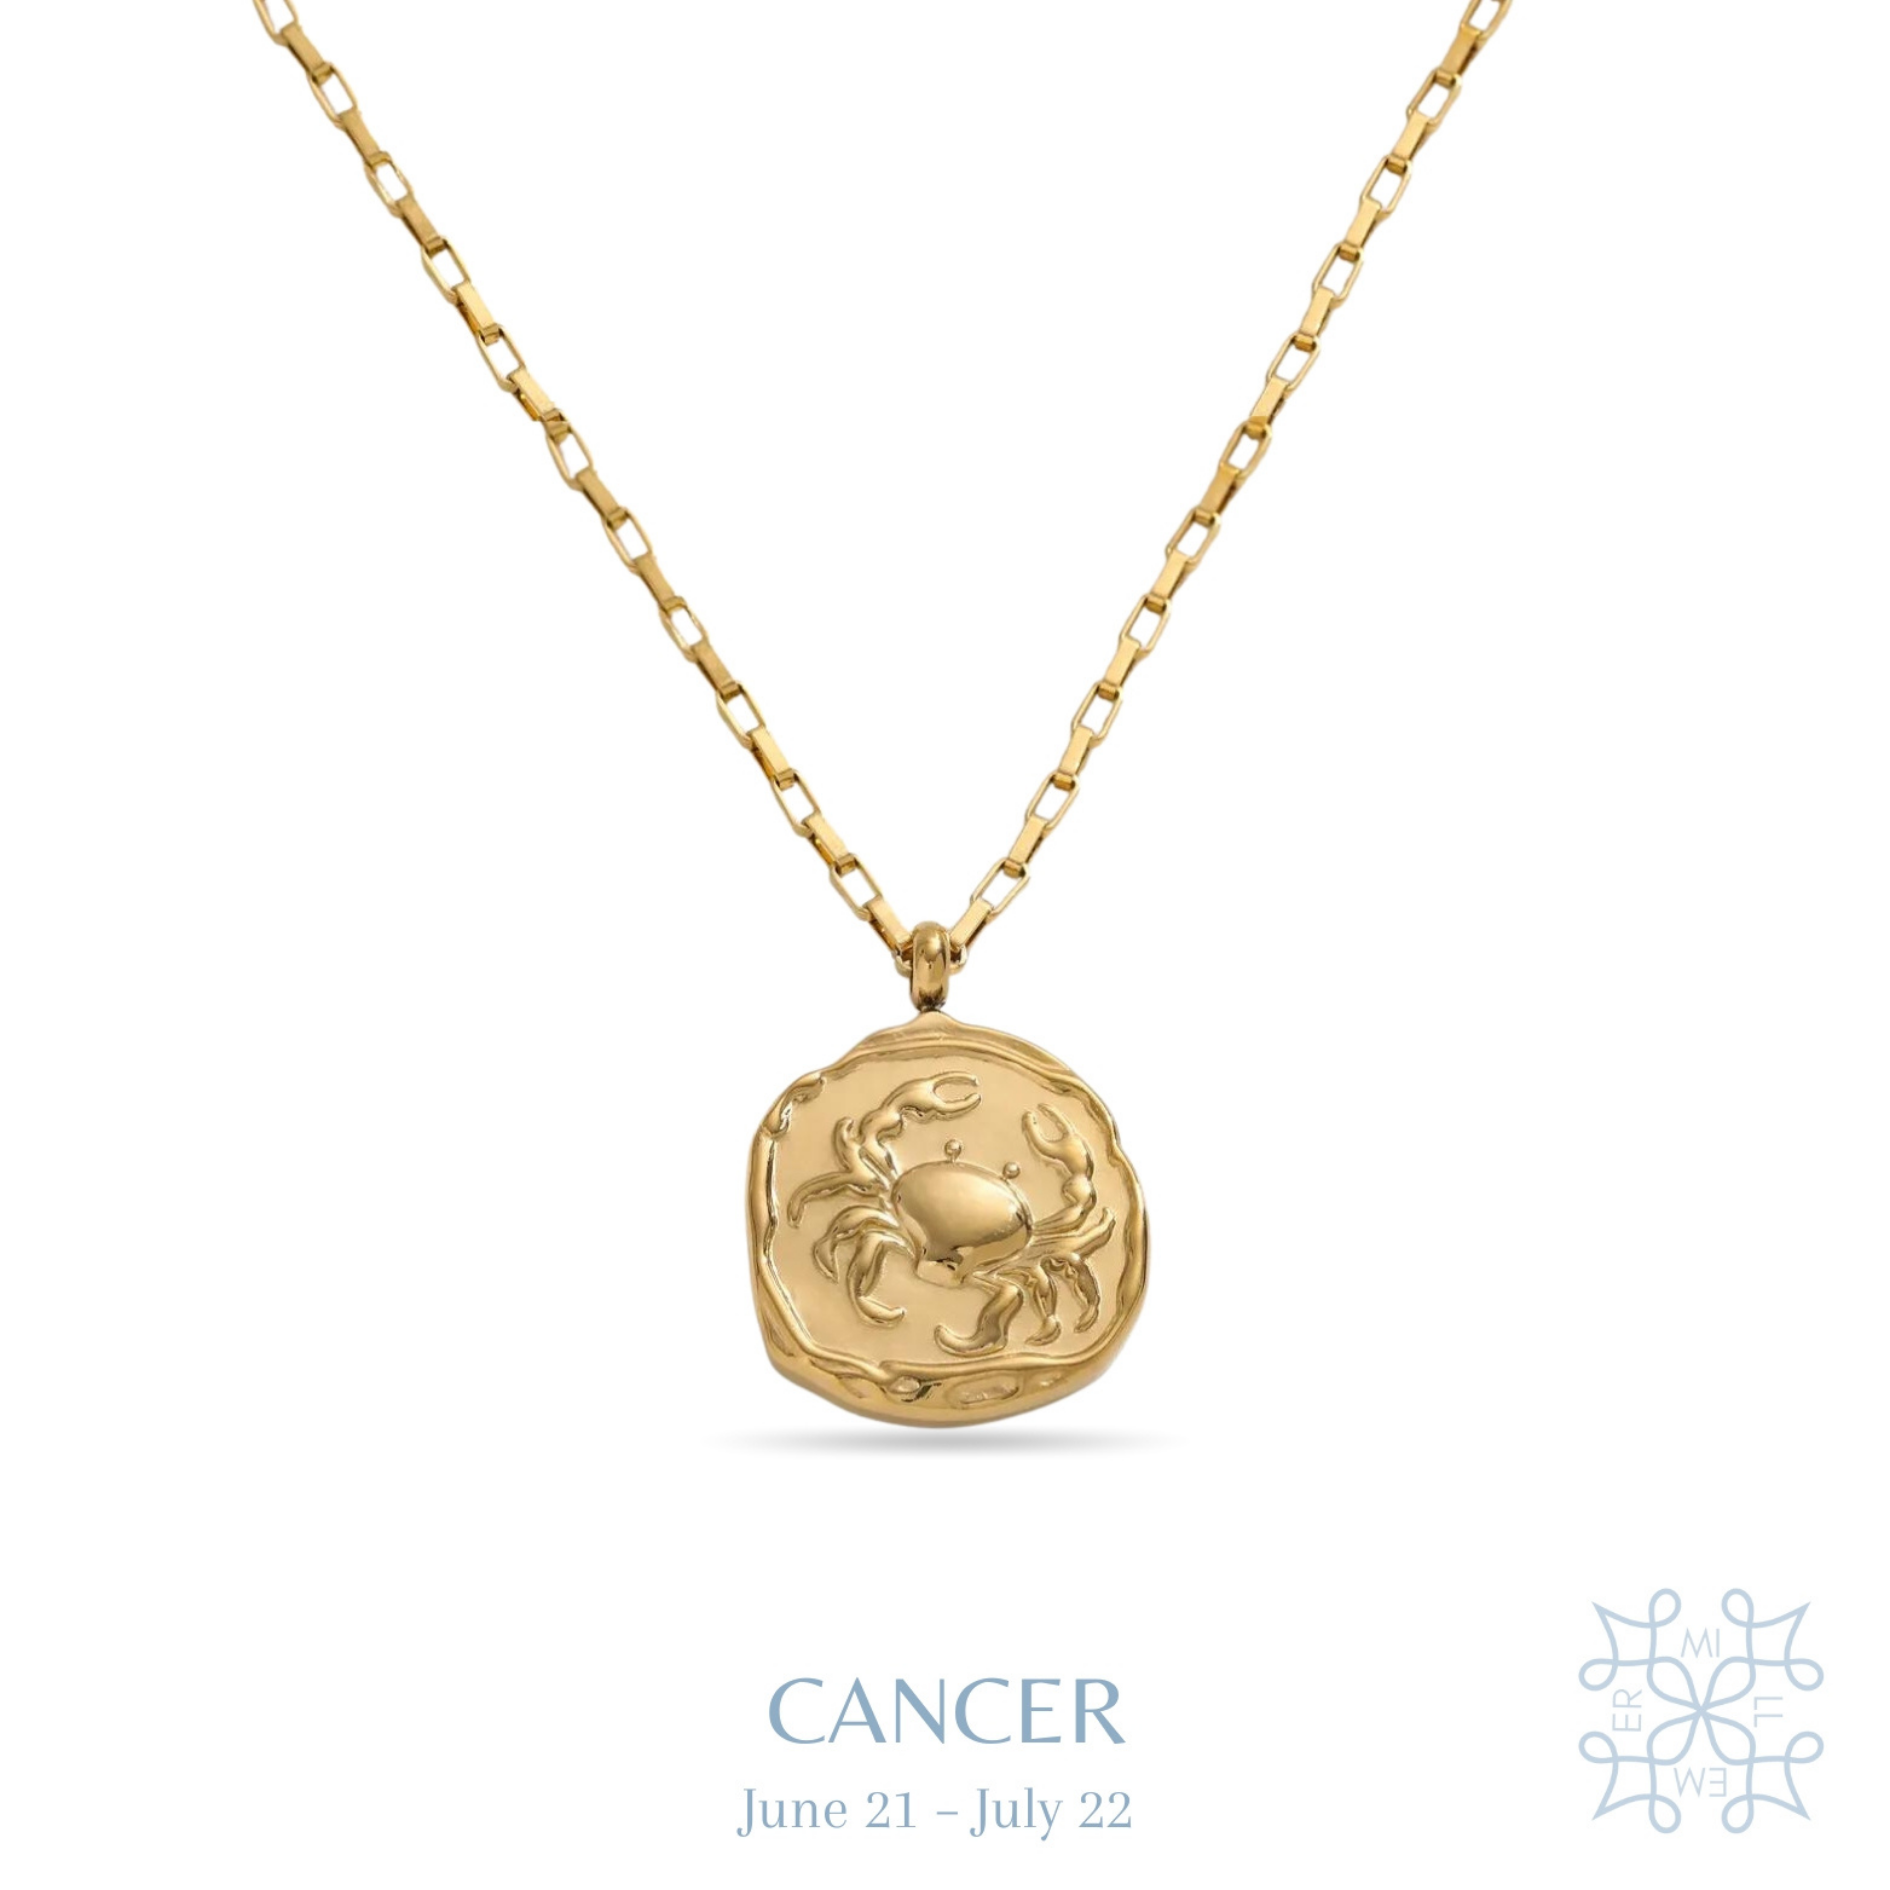 Cancer Zodiac Medallion Gold Necklace -gold pendant with a hanging medallion. The zodiac sign of the crab engraved on the medallion. The shape of the medallion is round and irregular